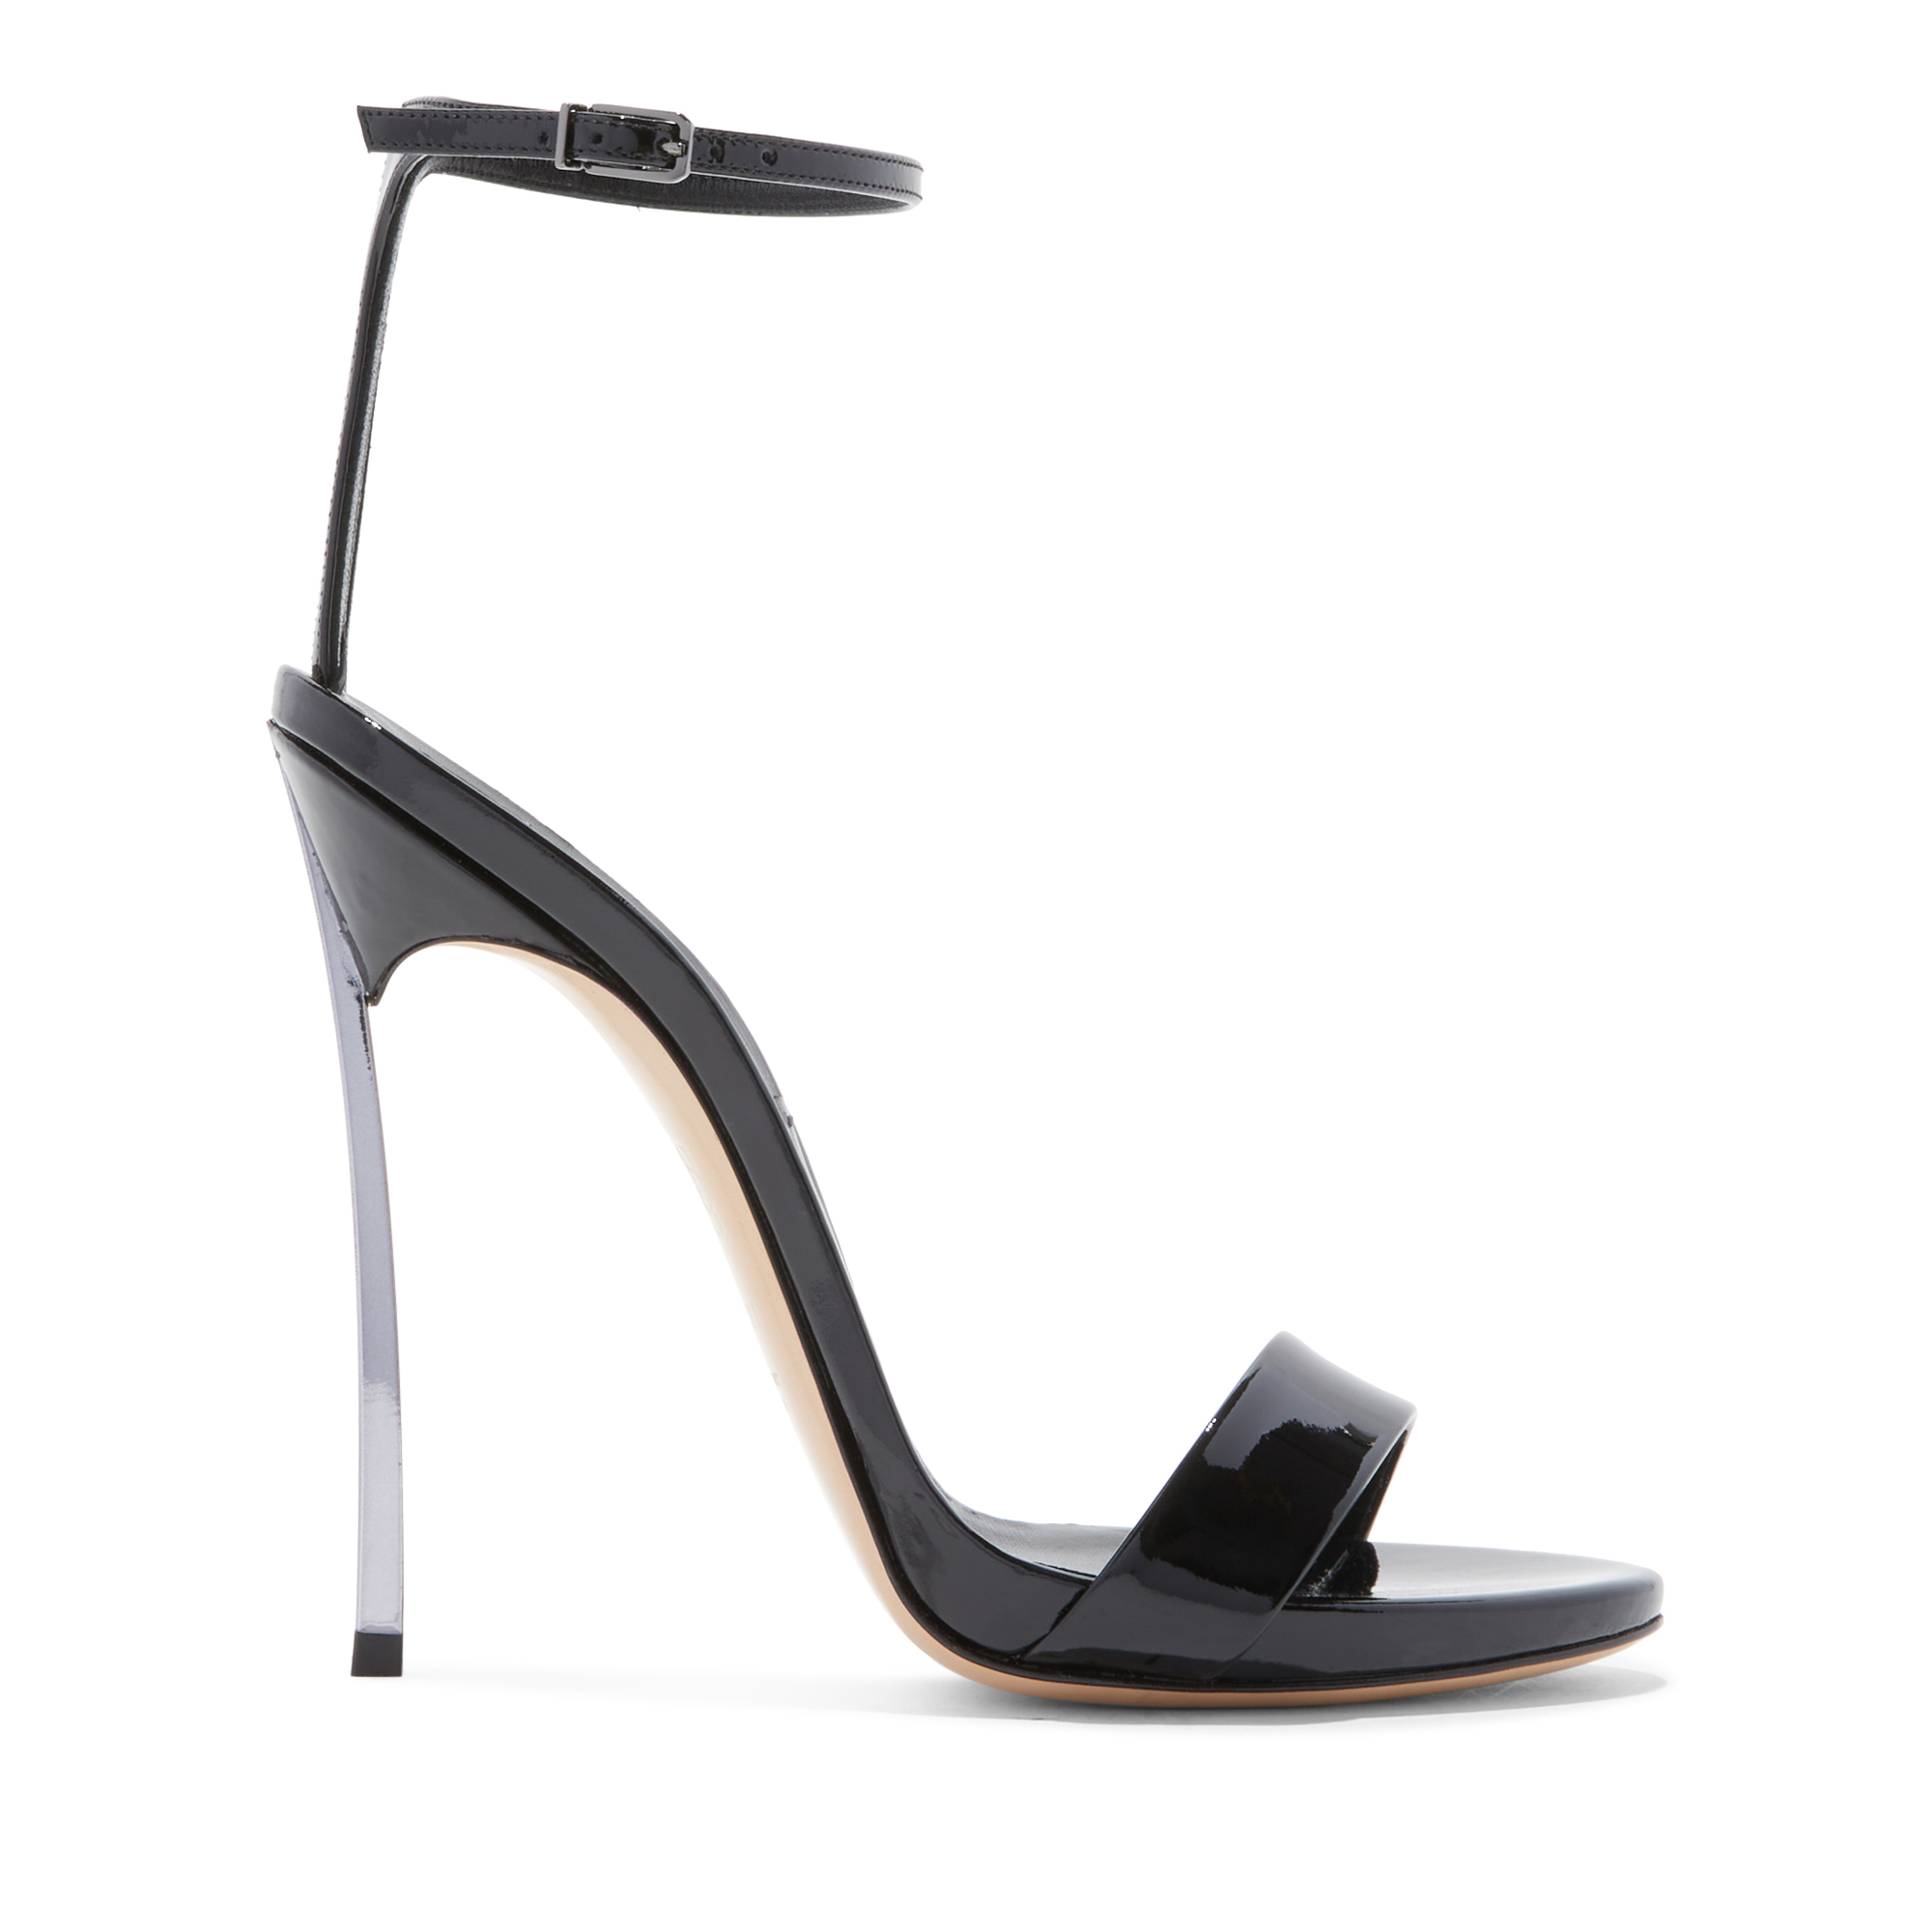 Casadei Blade Patent Leather - Woman Sandals Black 38